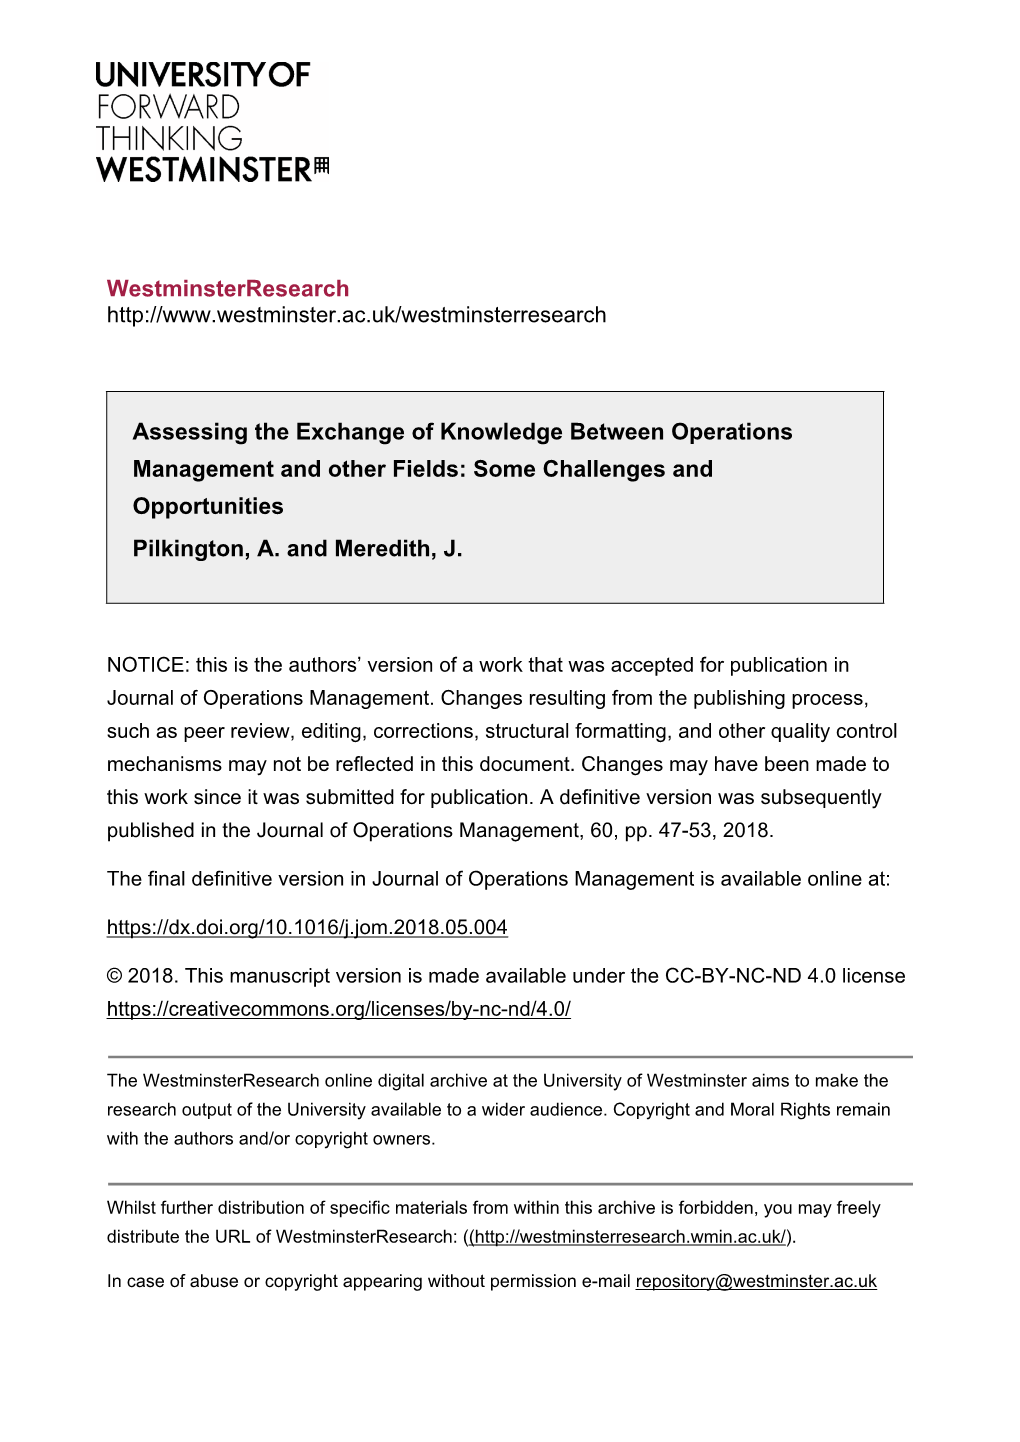 Westminsterresearch Assessing the Exchange of Knowledge Between Operations Management and Other Fields